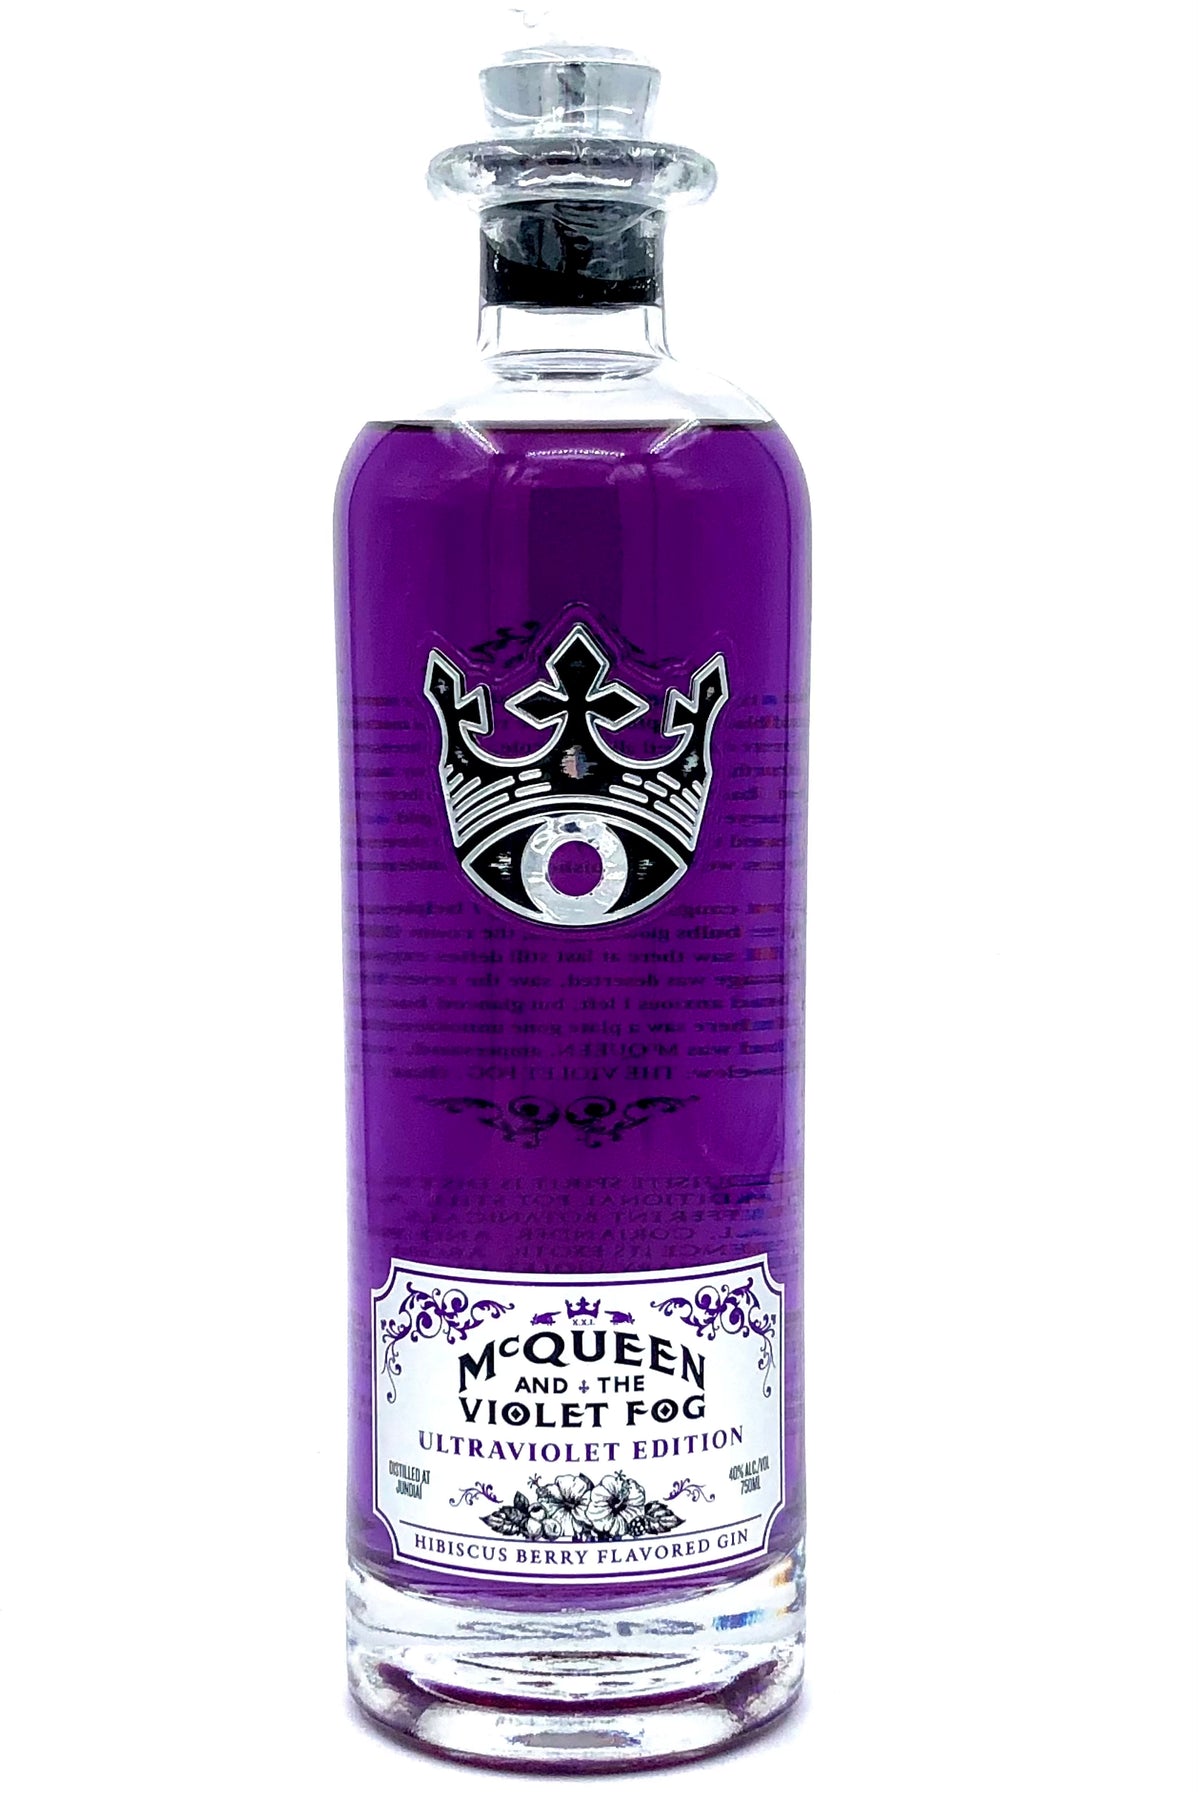 McQueen and the Violet Fog Ultraviolet Hibiscus Berry Flavored Gin